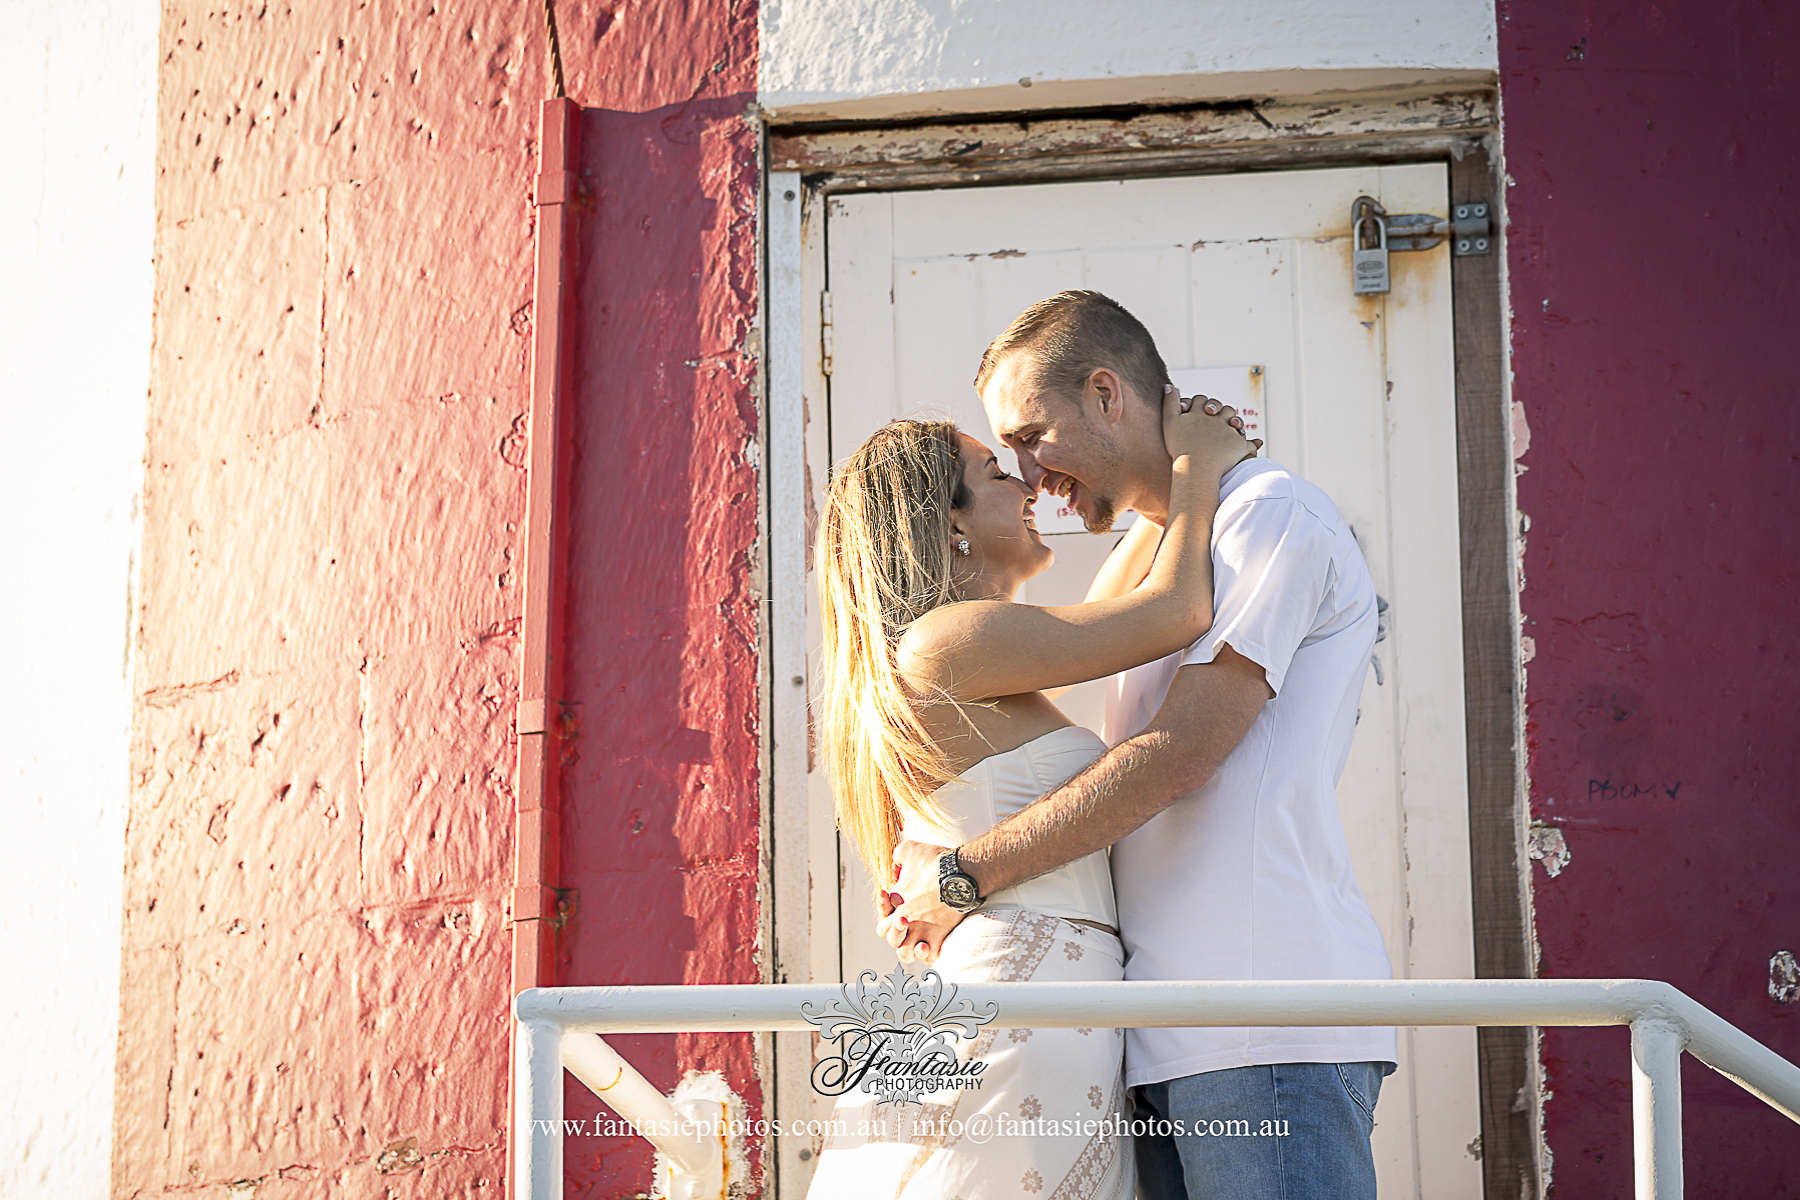 Prewedding Photography at hornby lighthouse | Fantasie Photography